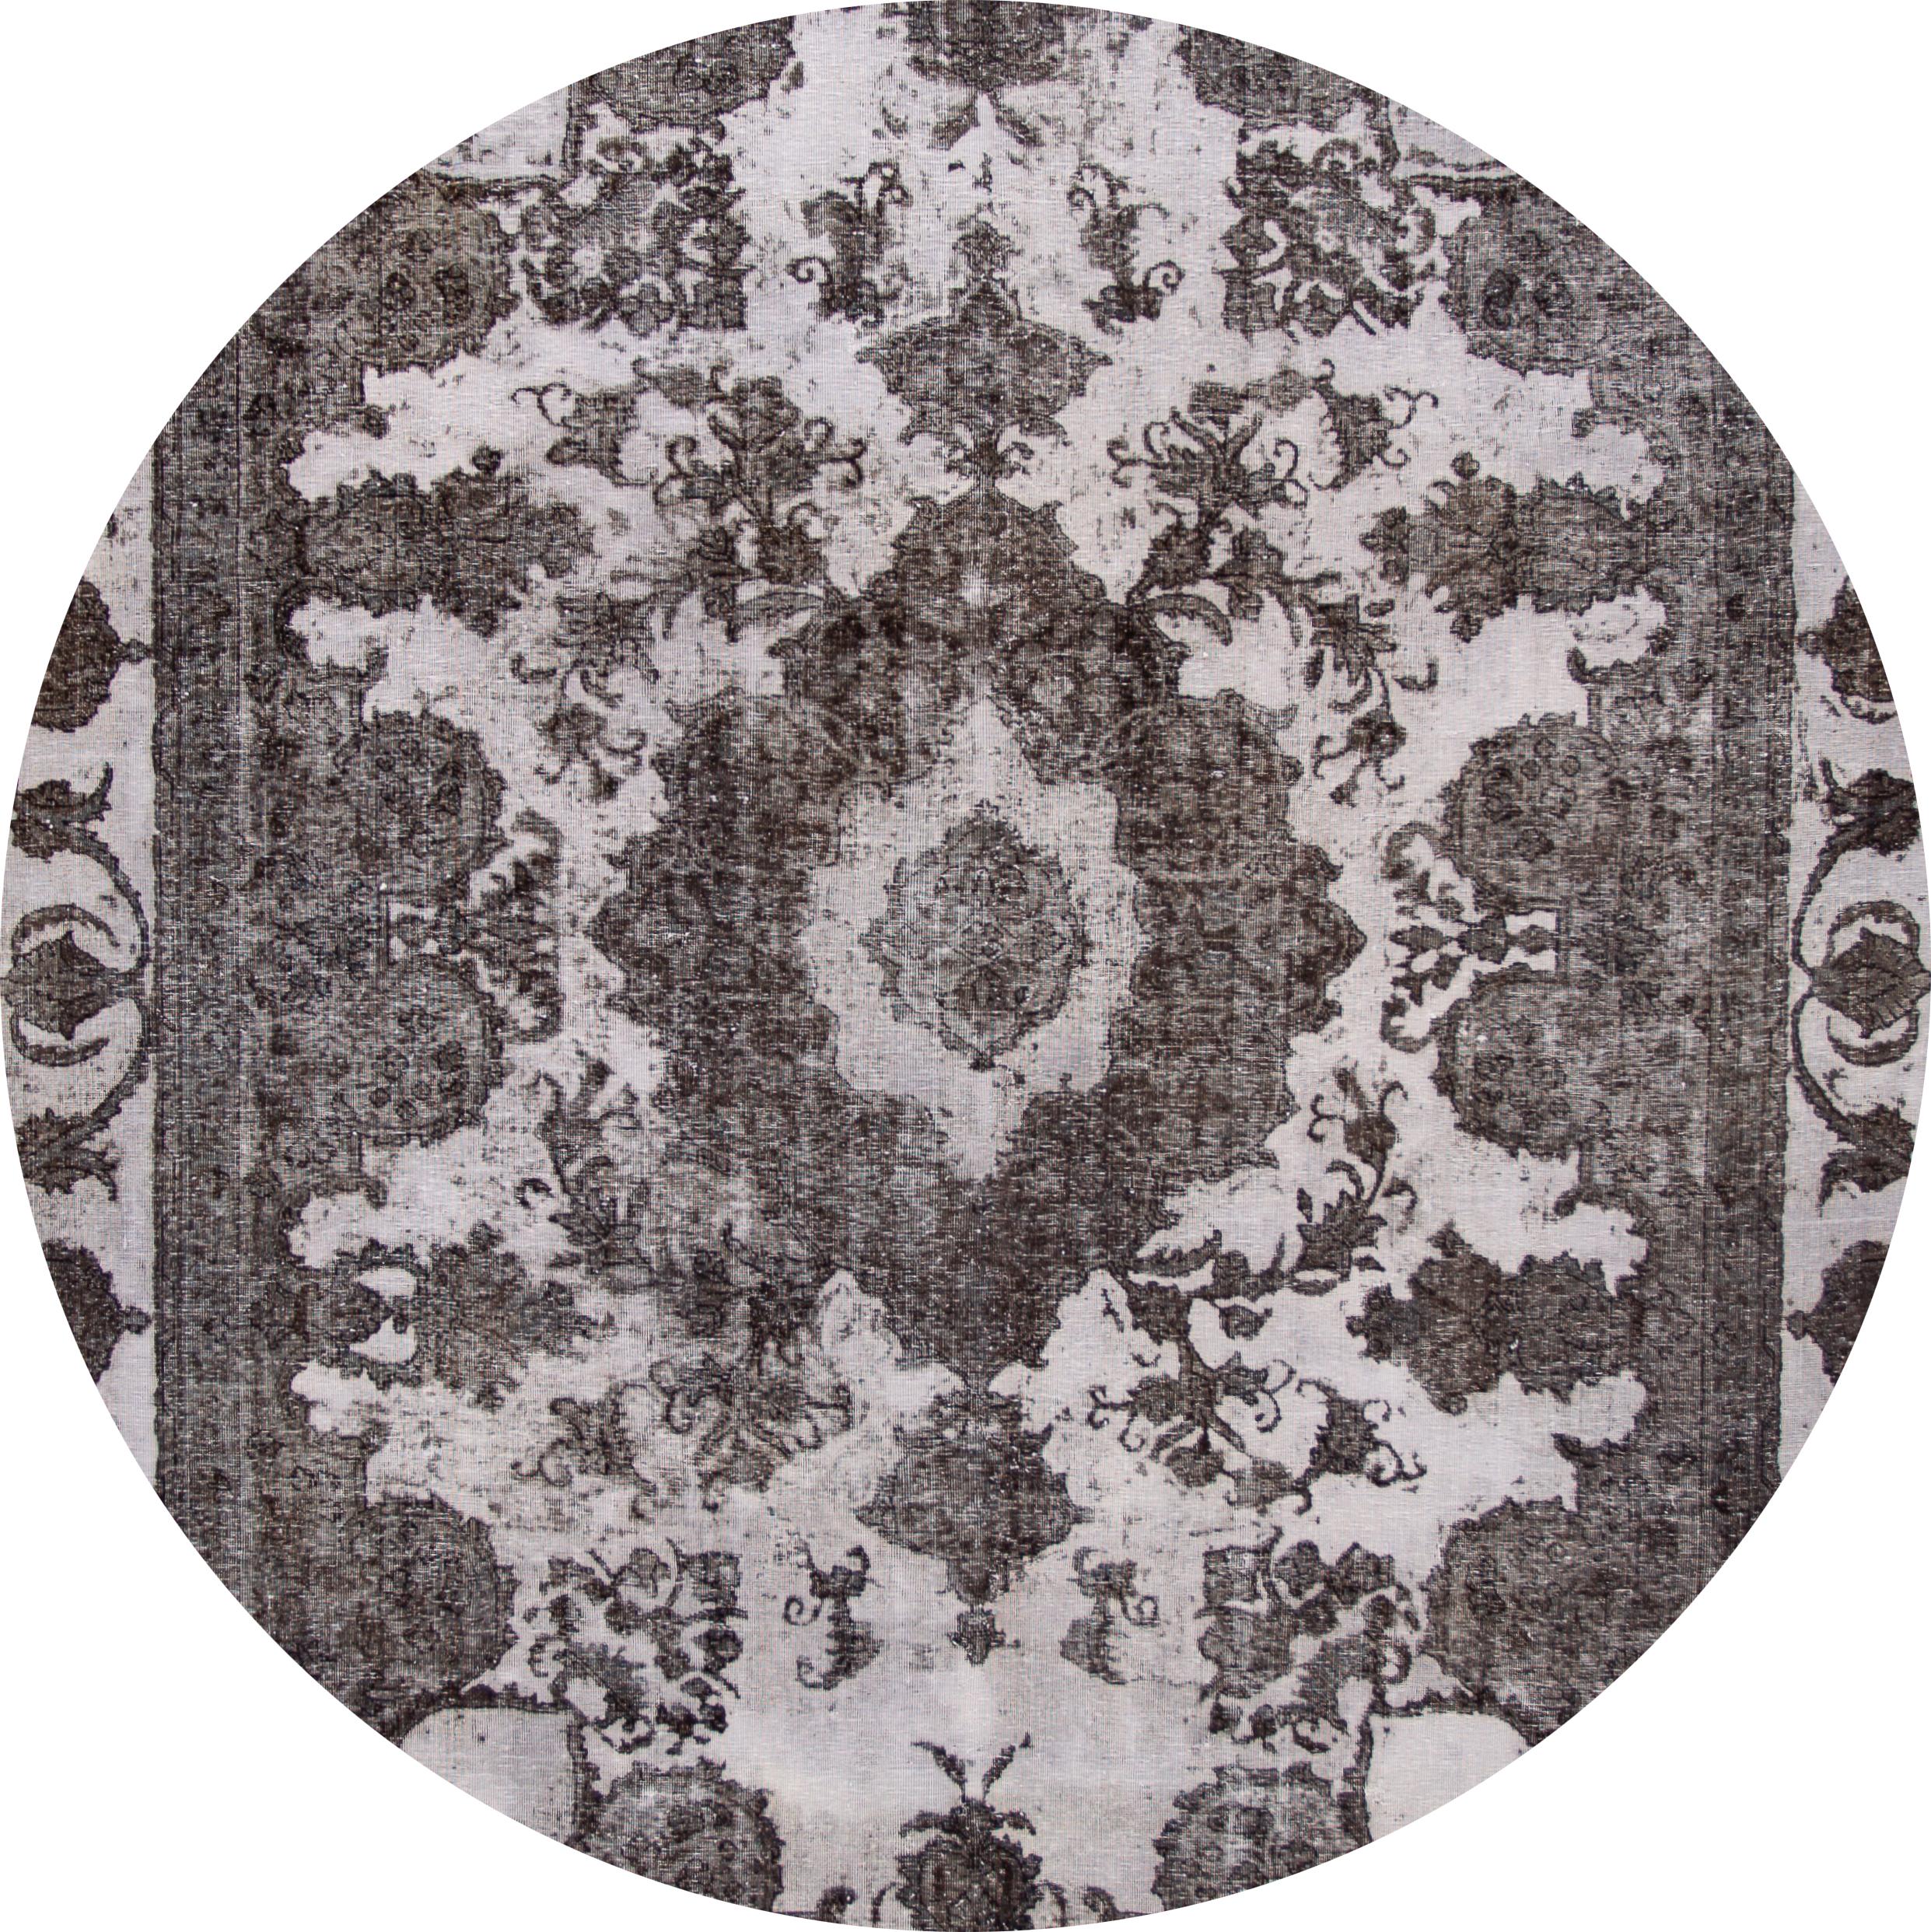 Beautiful antique overdyed rug, hand knotted wool with a dark gray field, light gray accents in all-over center medallion design.
This rug measures 8' 8